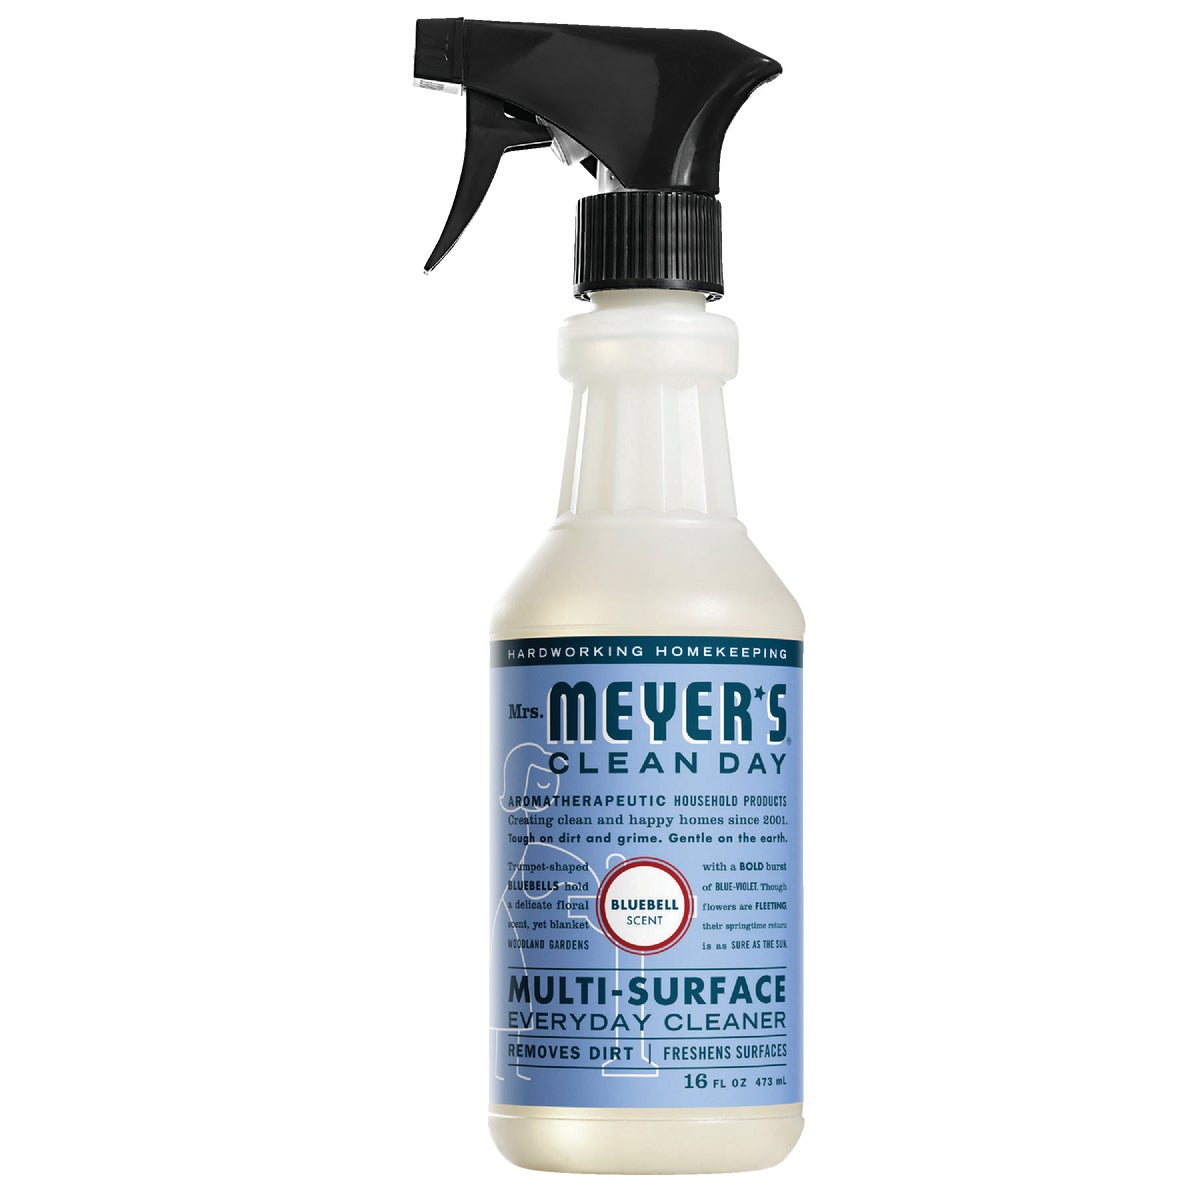 Mrs. Meyer's Clean Day 16 Oz. Bluebell Multi-Surface Everyday Cleaner